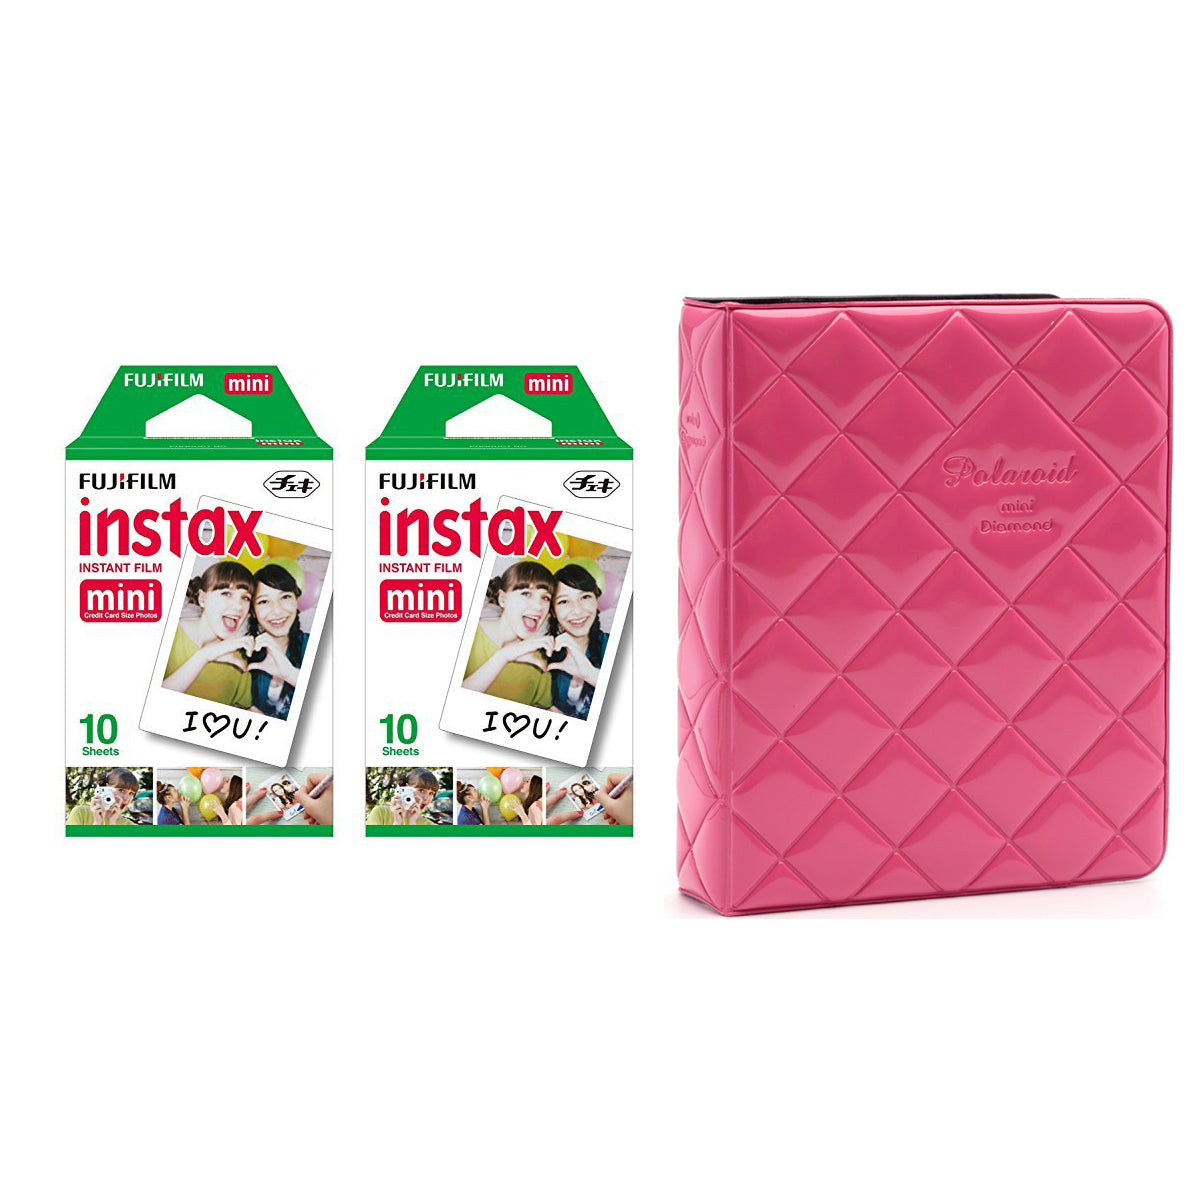 Fujifilm Instax Mini 2 Pack of 10 Sheets Instant Film with dimand Photo Album 64-Sheets (pink)